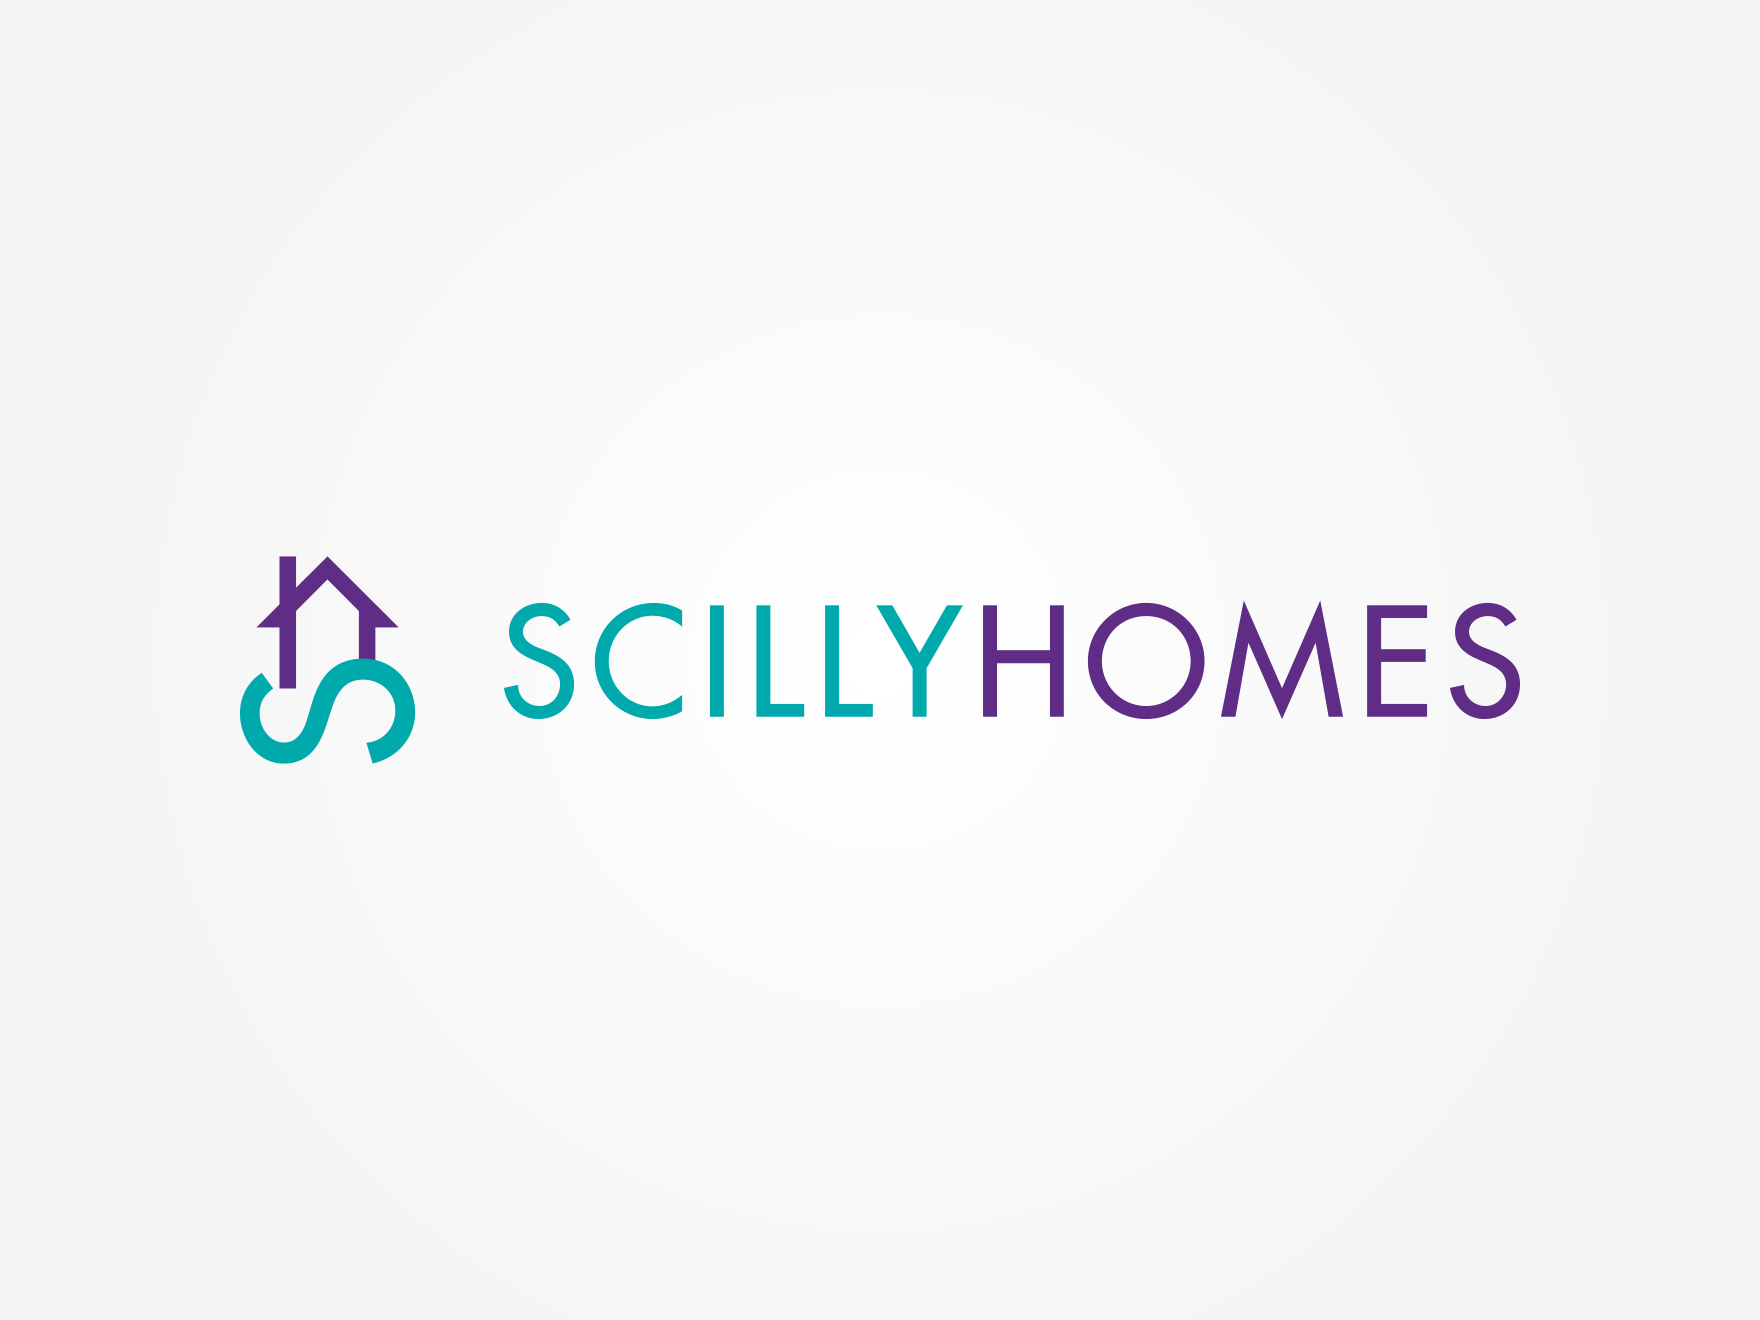 Scilly Homes launches May 2015